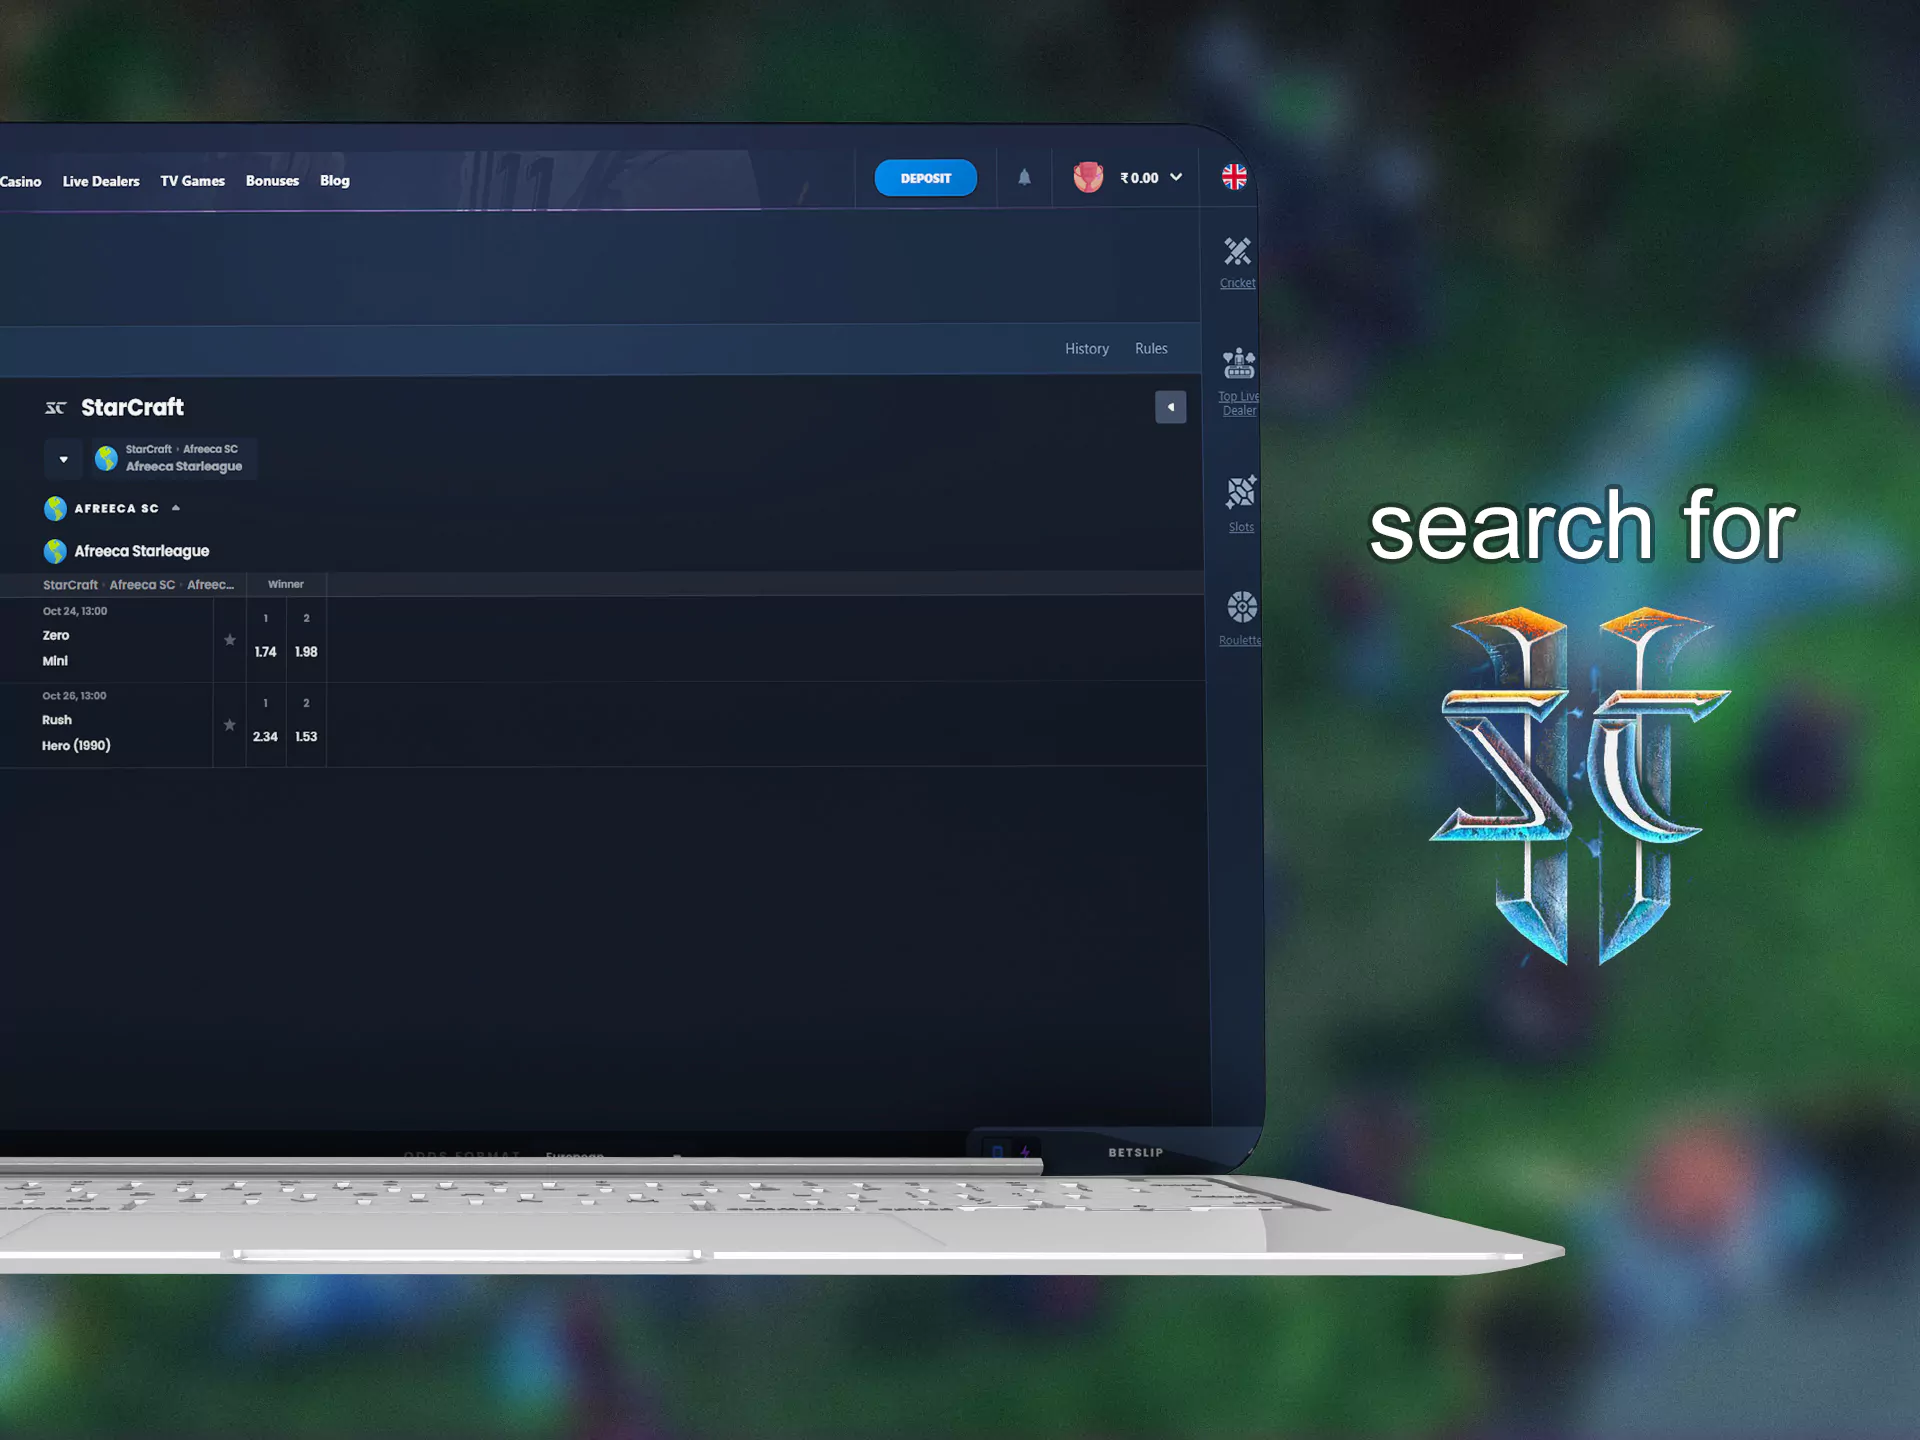 Look through the betting list and click on the Starcraft icon.